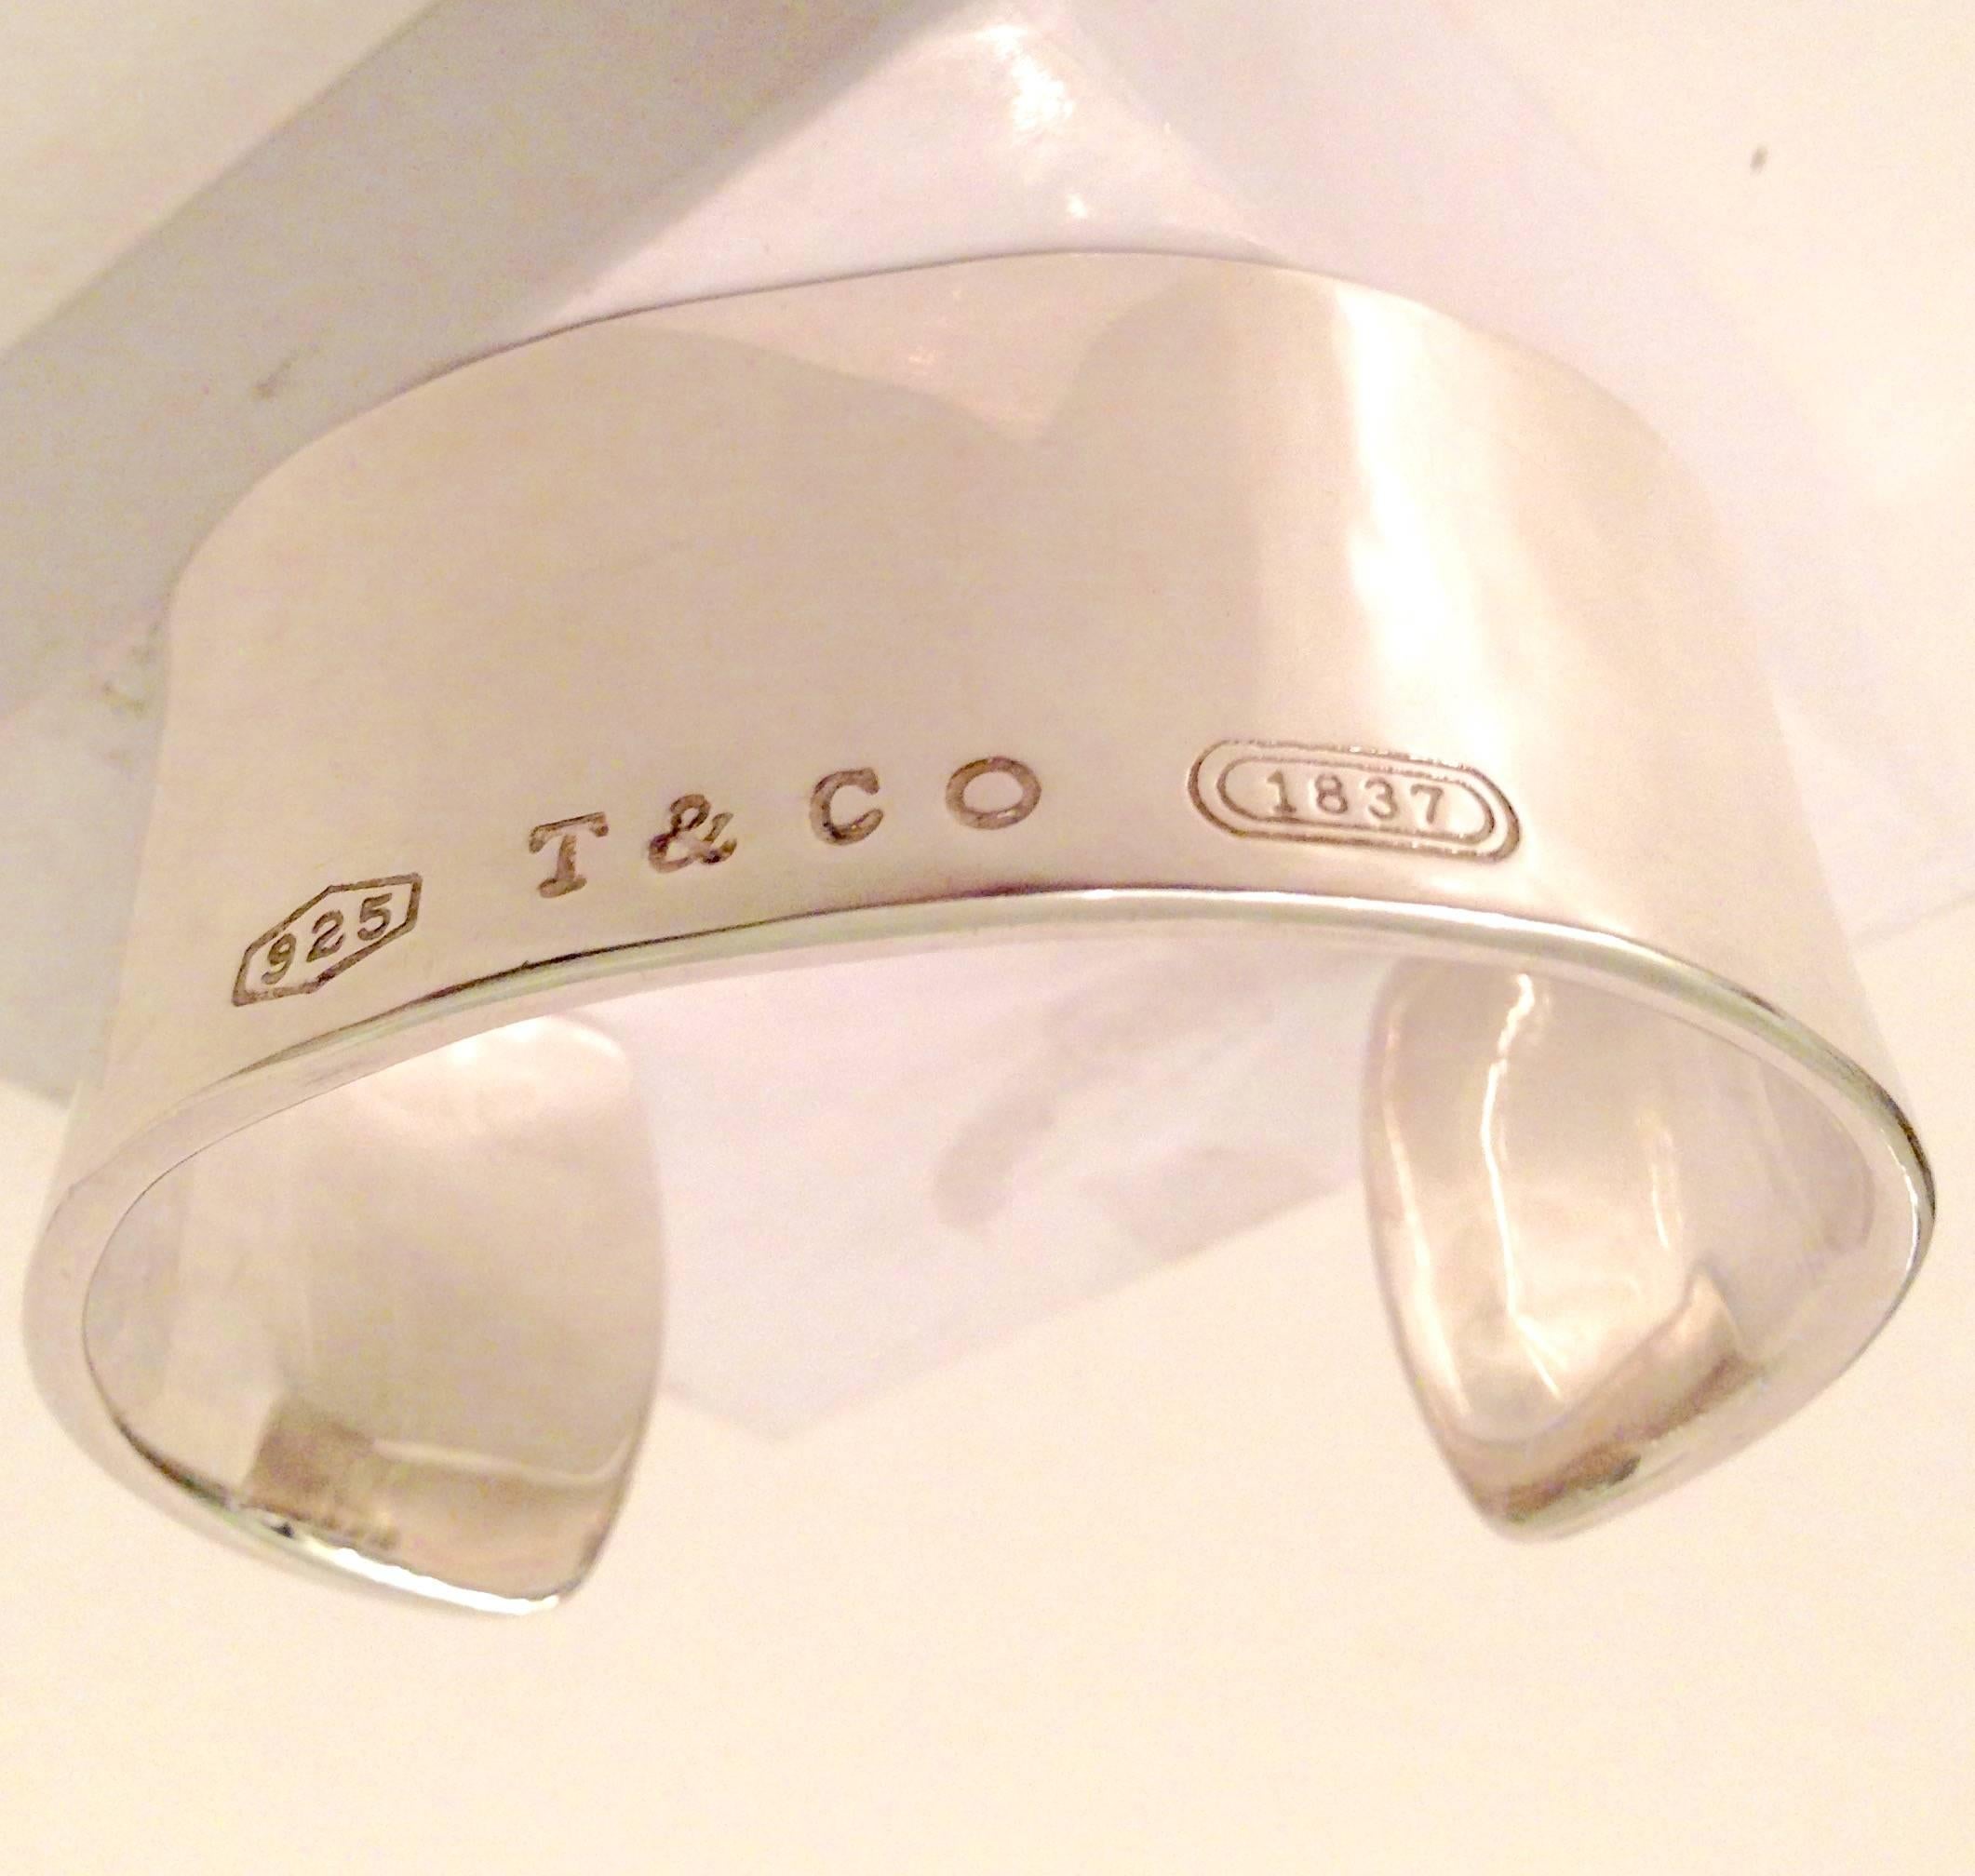 925 Sterling Silver Tiffany wide cuff in excellent condition. Weighs 82.2g. Signed 